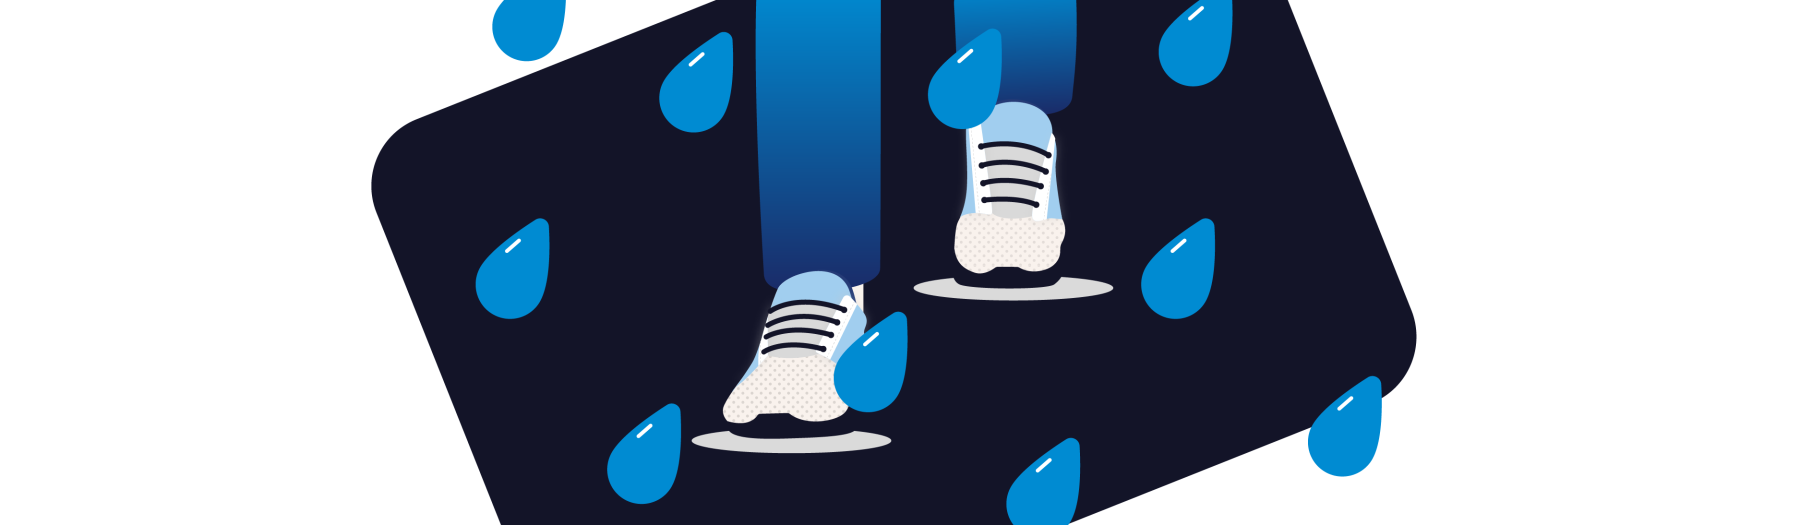 Illustration displaying footsteps coming down stairs during wet weather